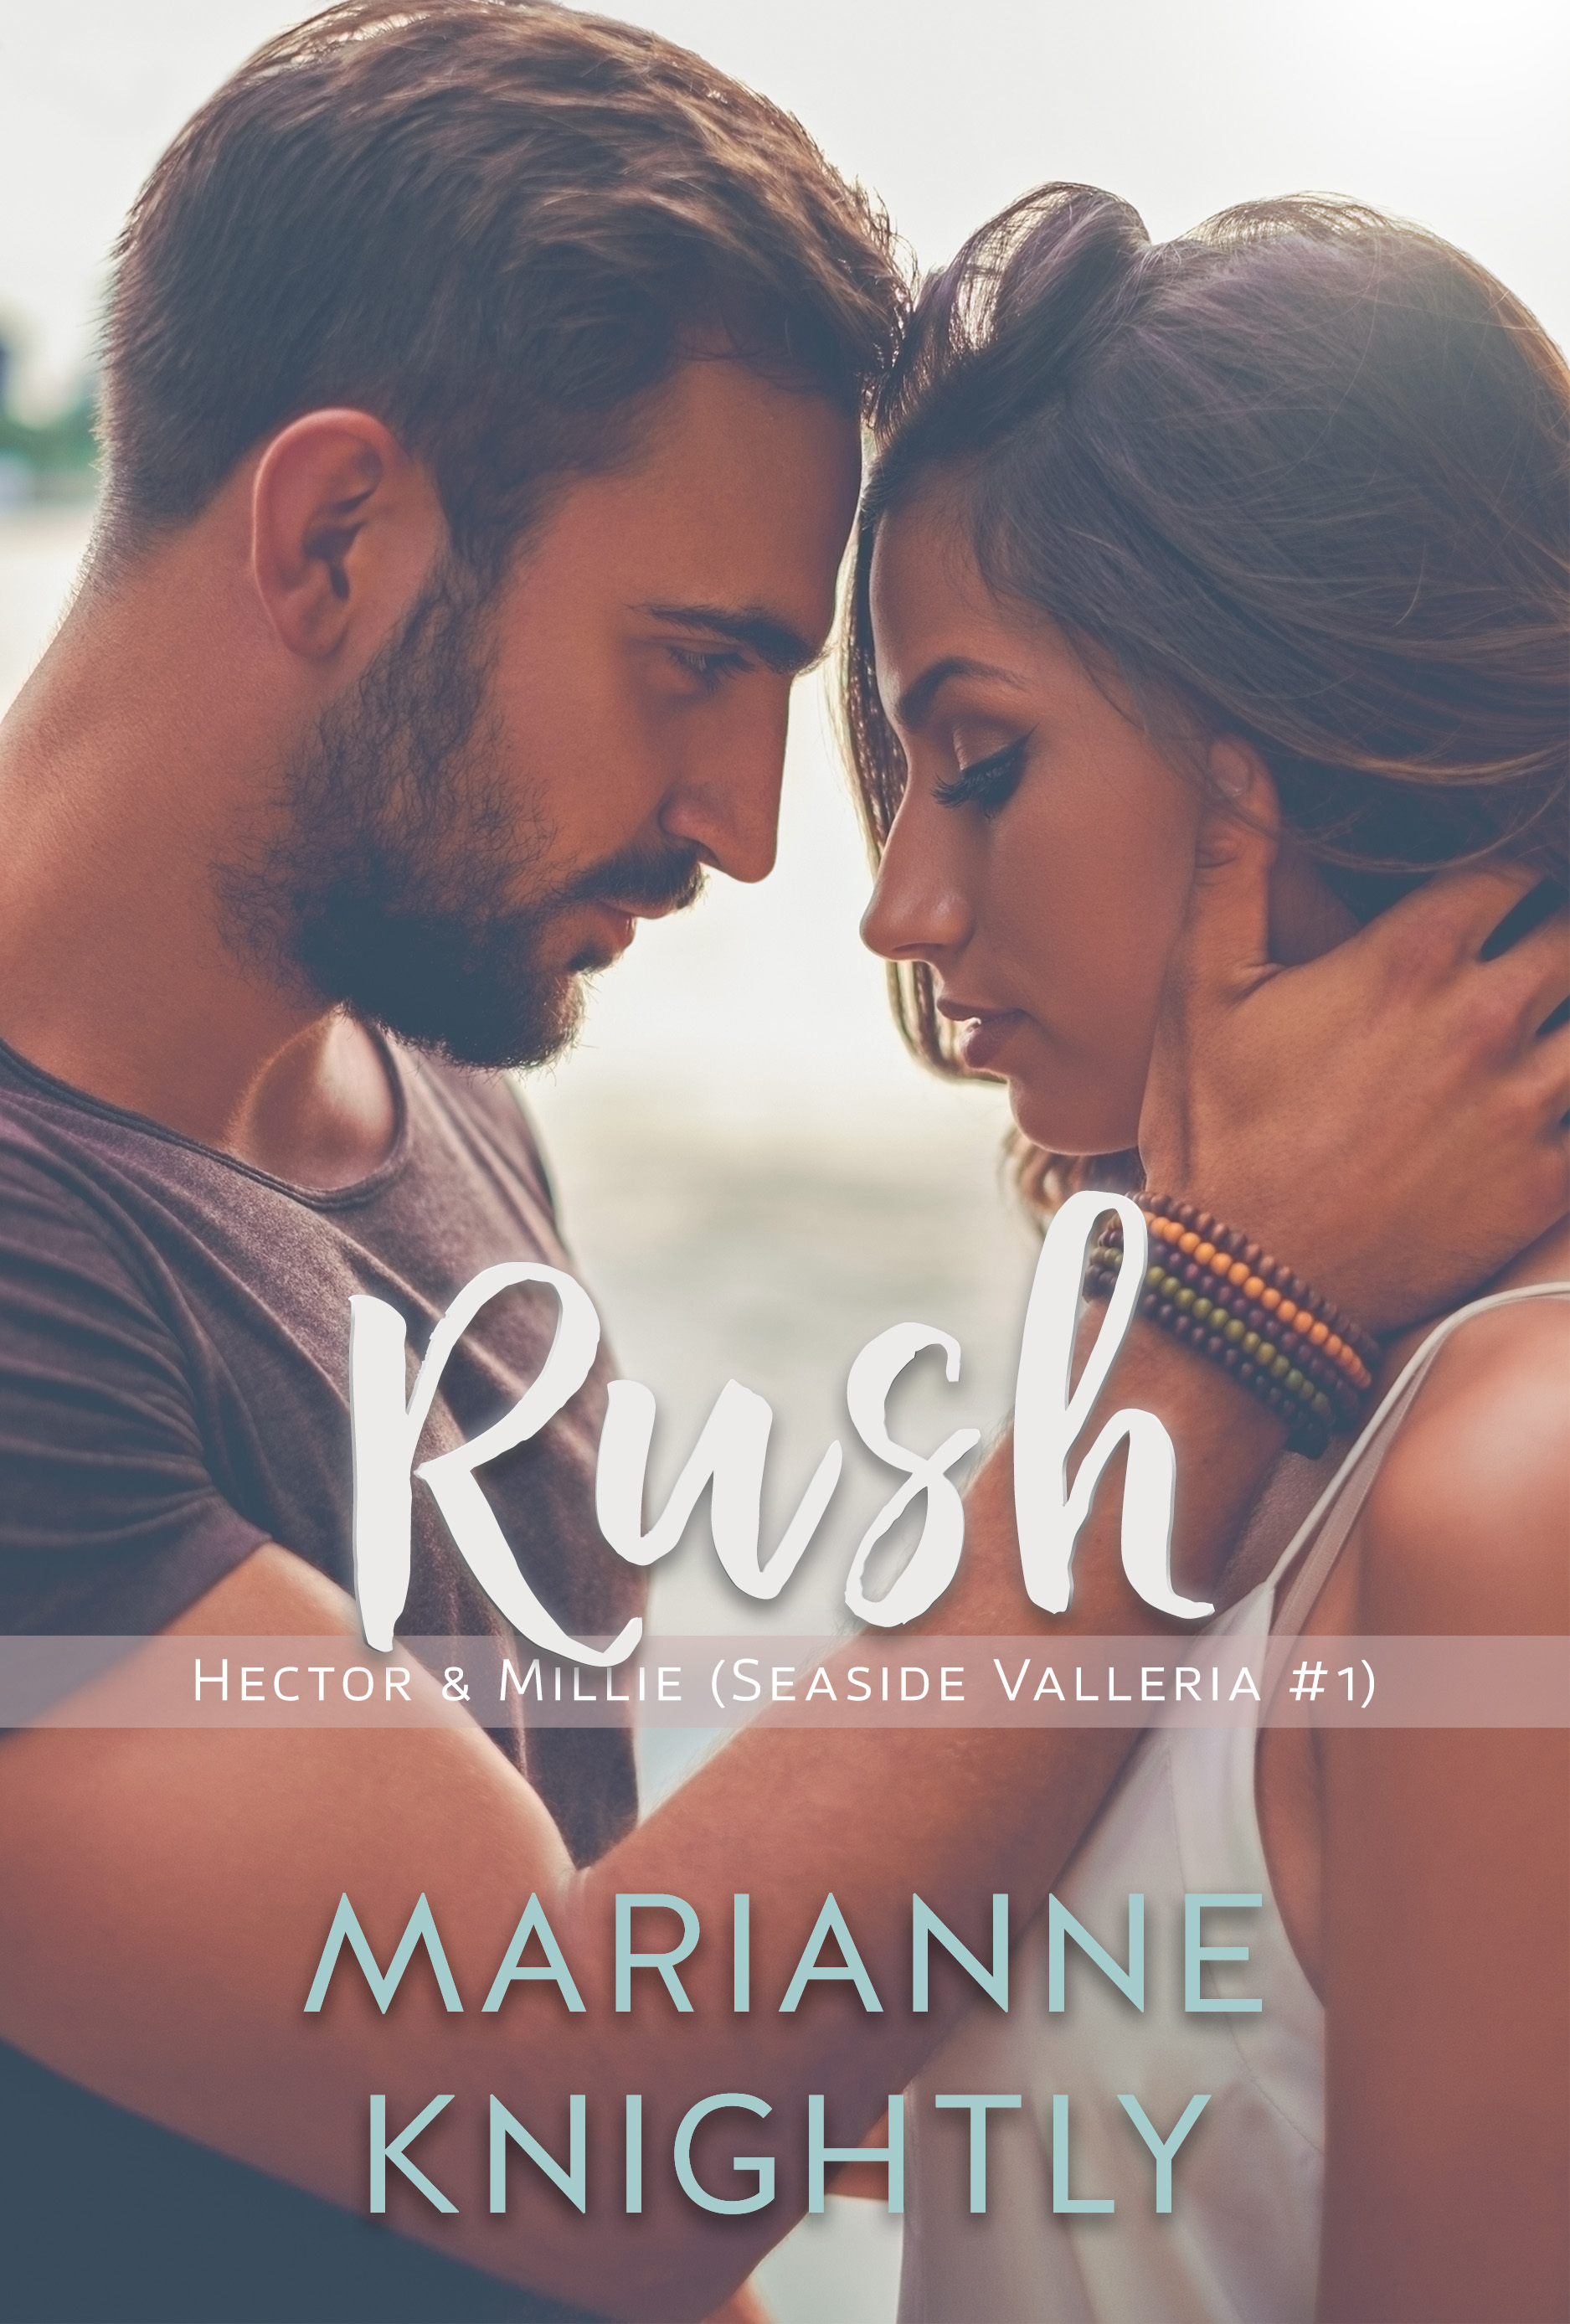 Rush (Hector & Millie) (Seaside Valleria 1) by Marianne Knightly